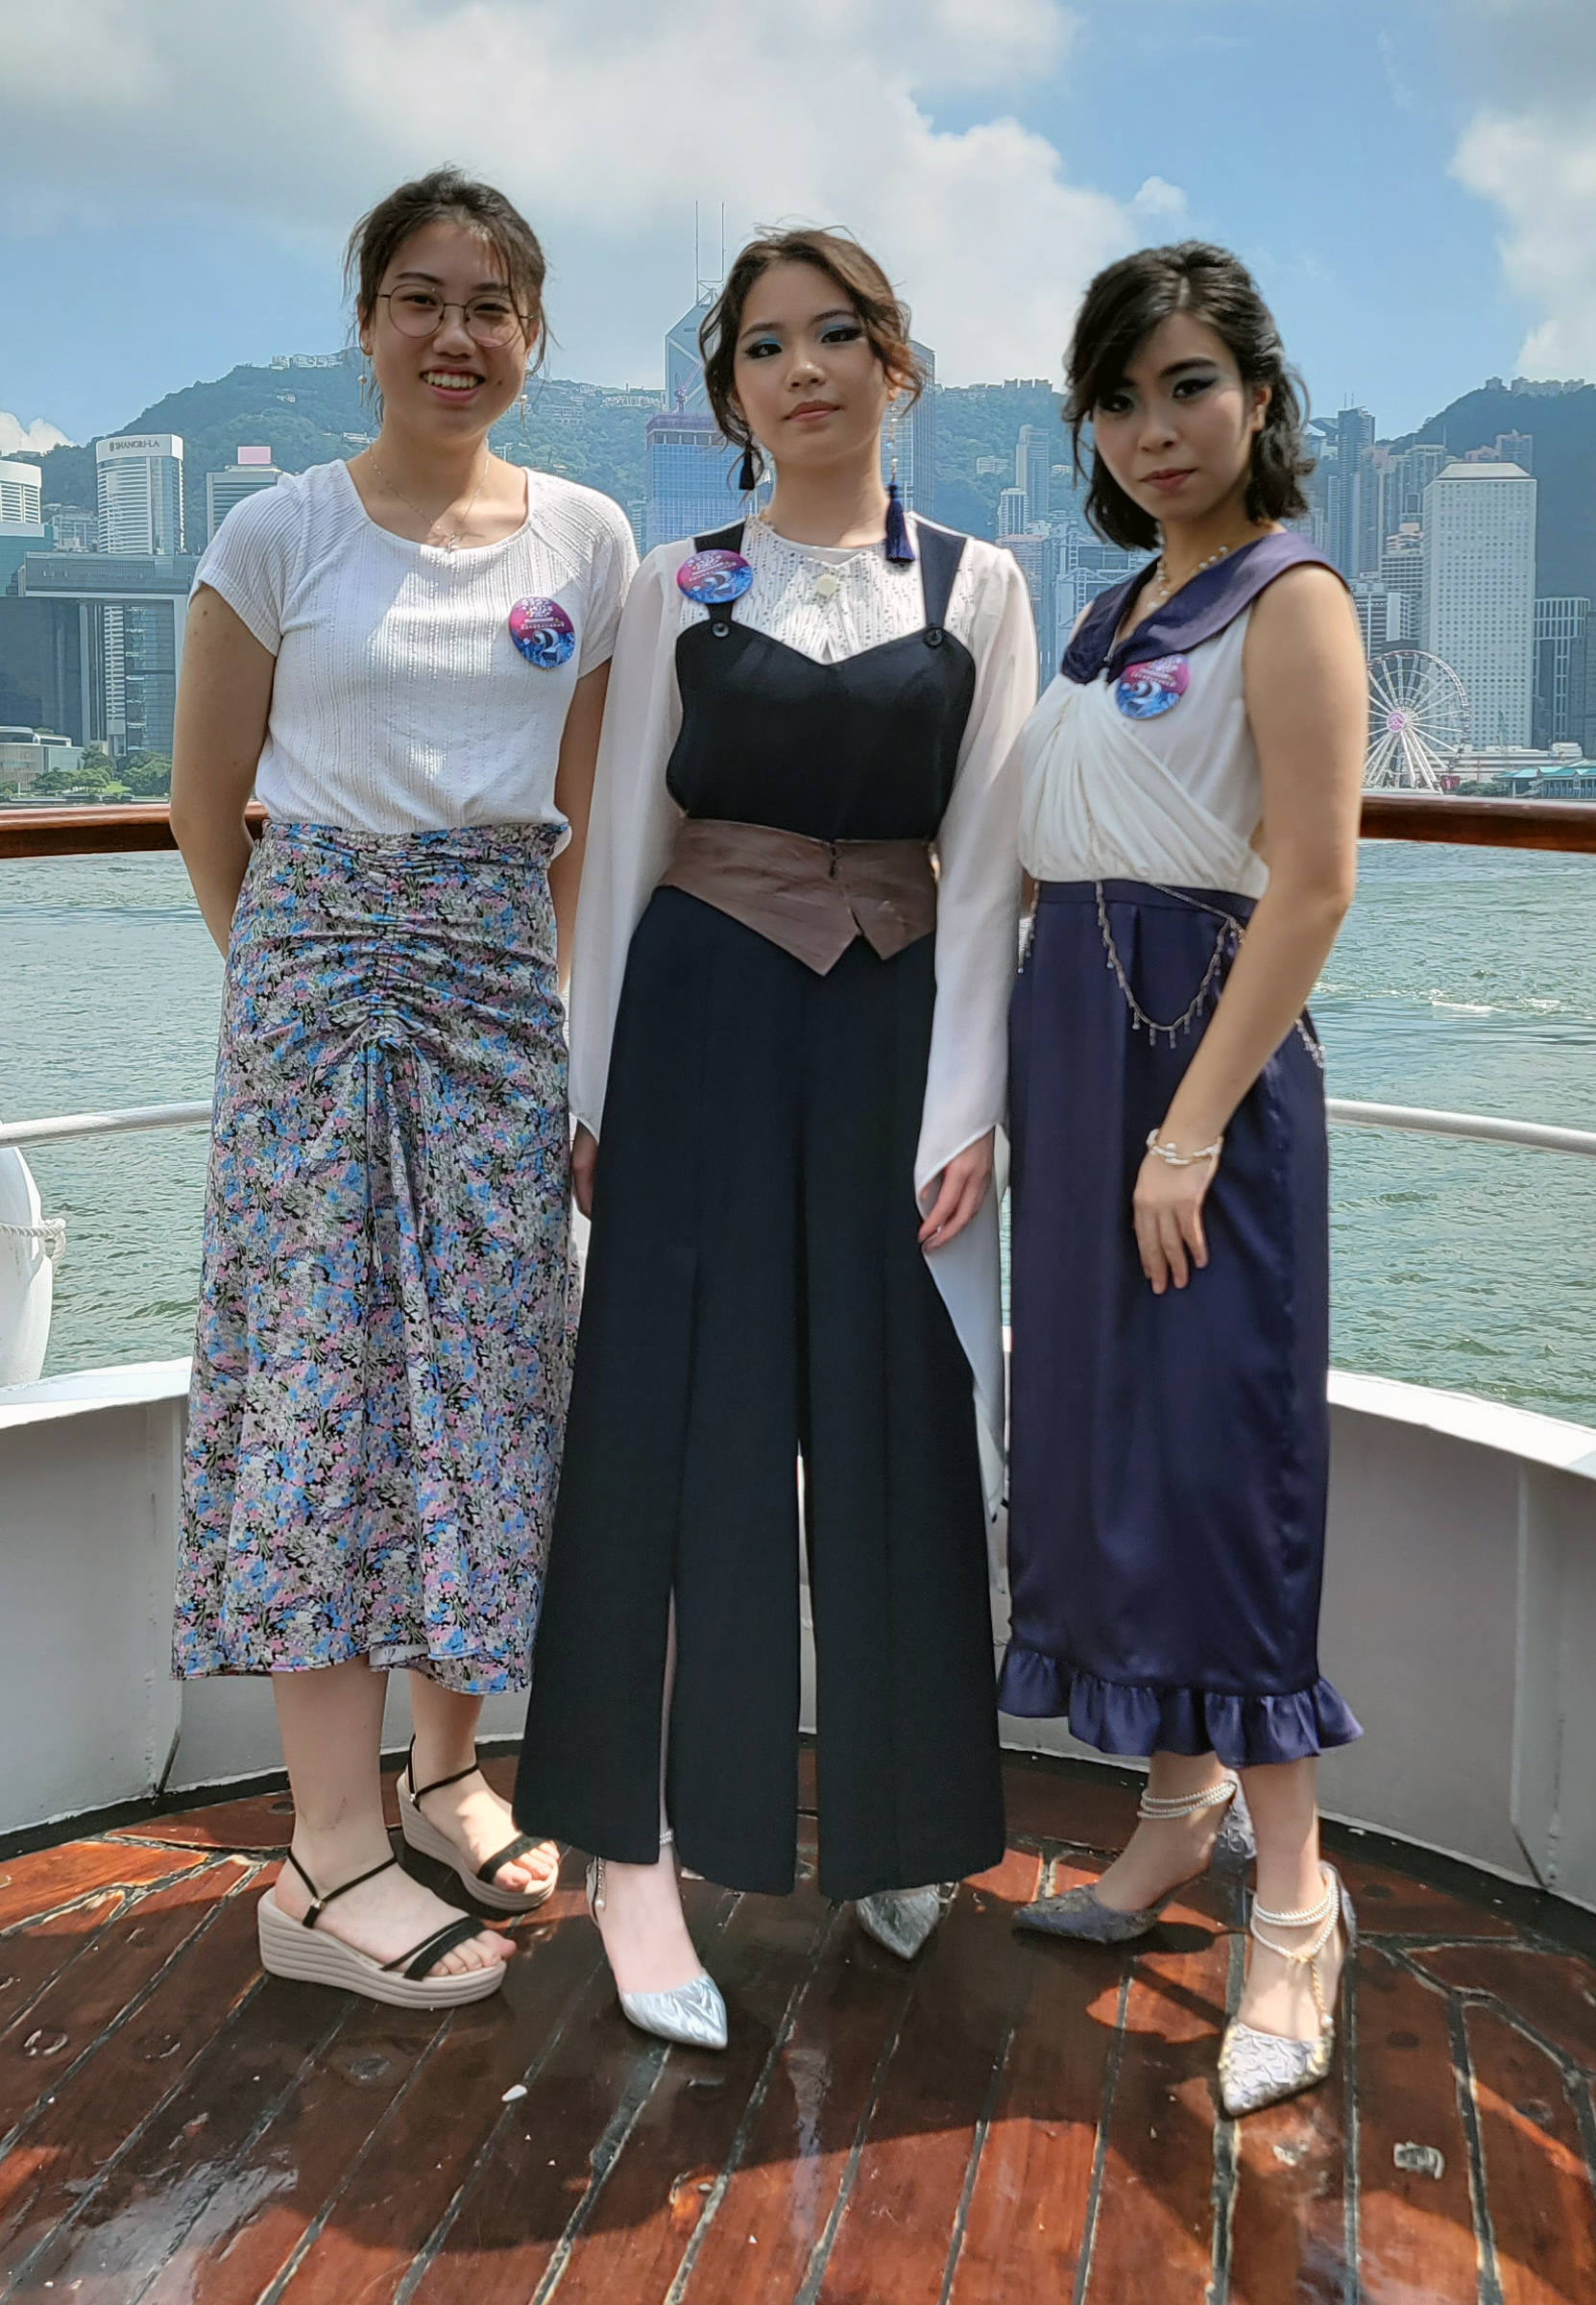 A group of women posing for a pictureDescription automatically generated